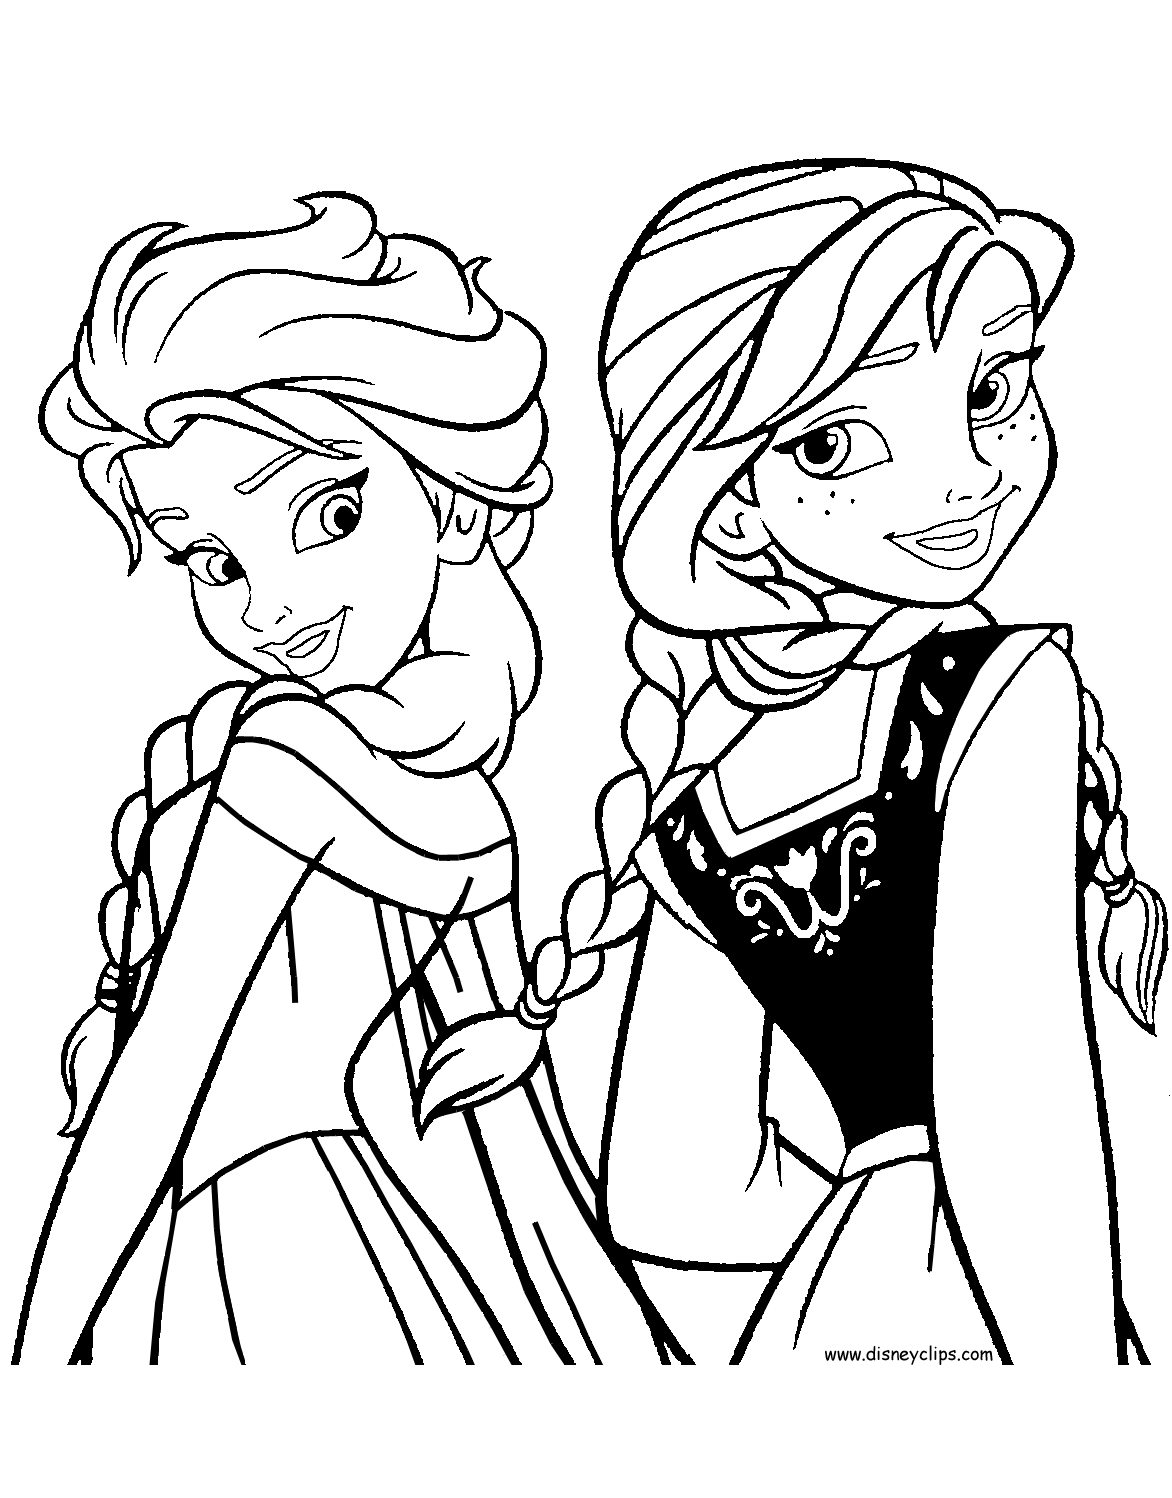 frozen coloring books updated 101 frozen coloring pages frozen 2 coloring pages coloring books frozen 